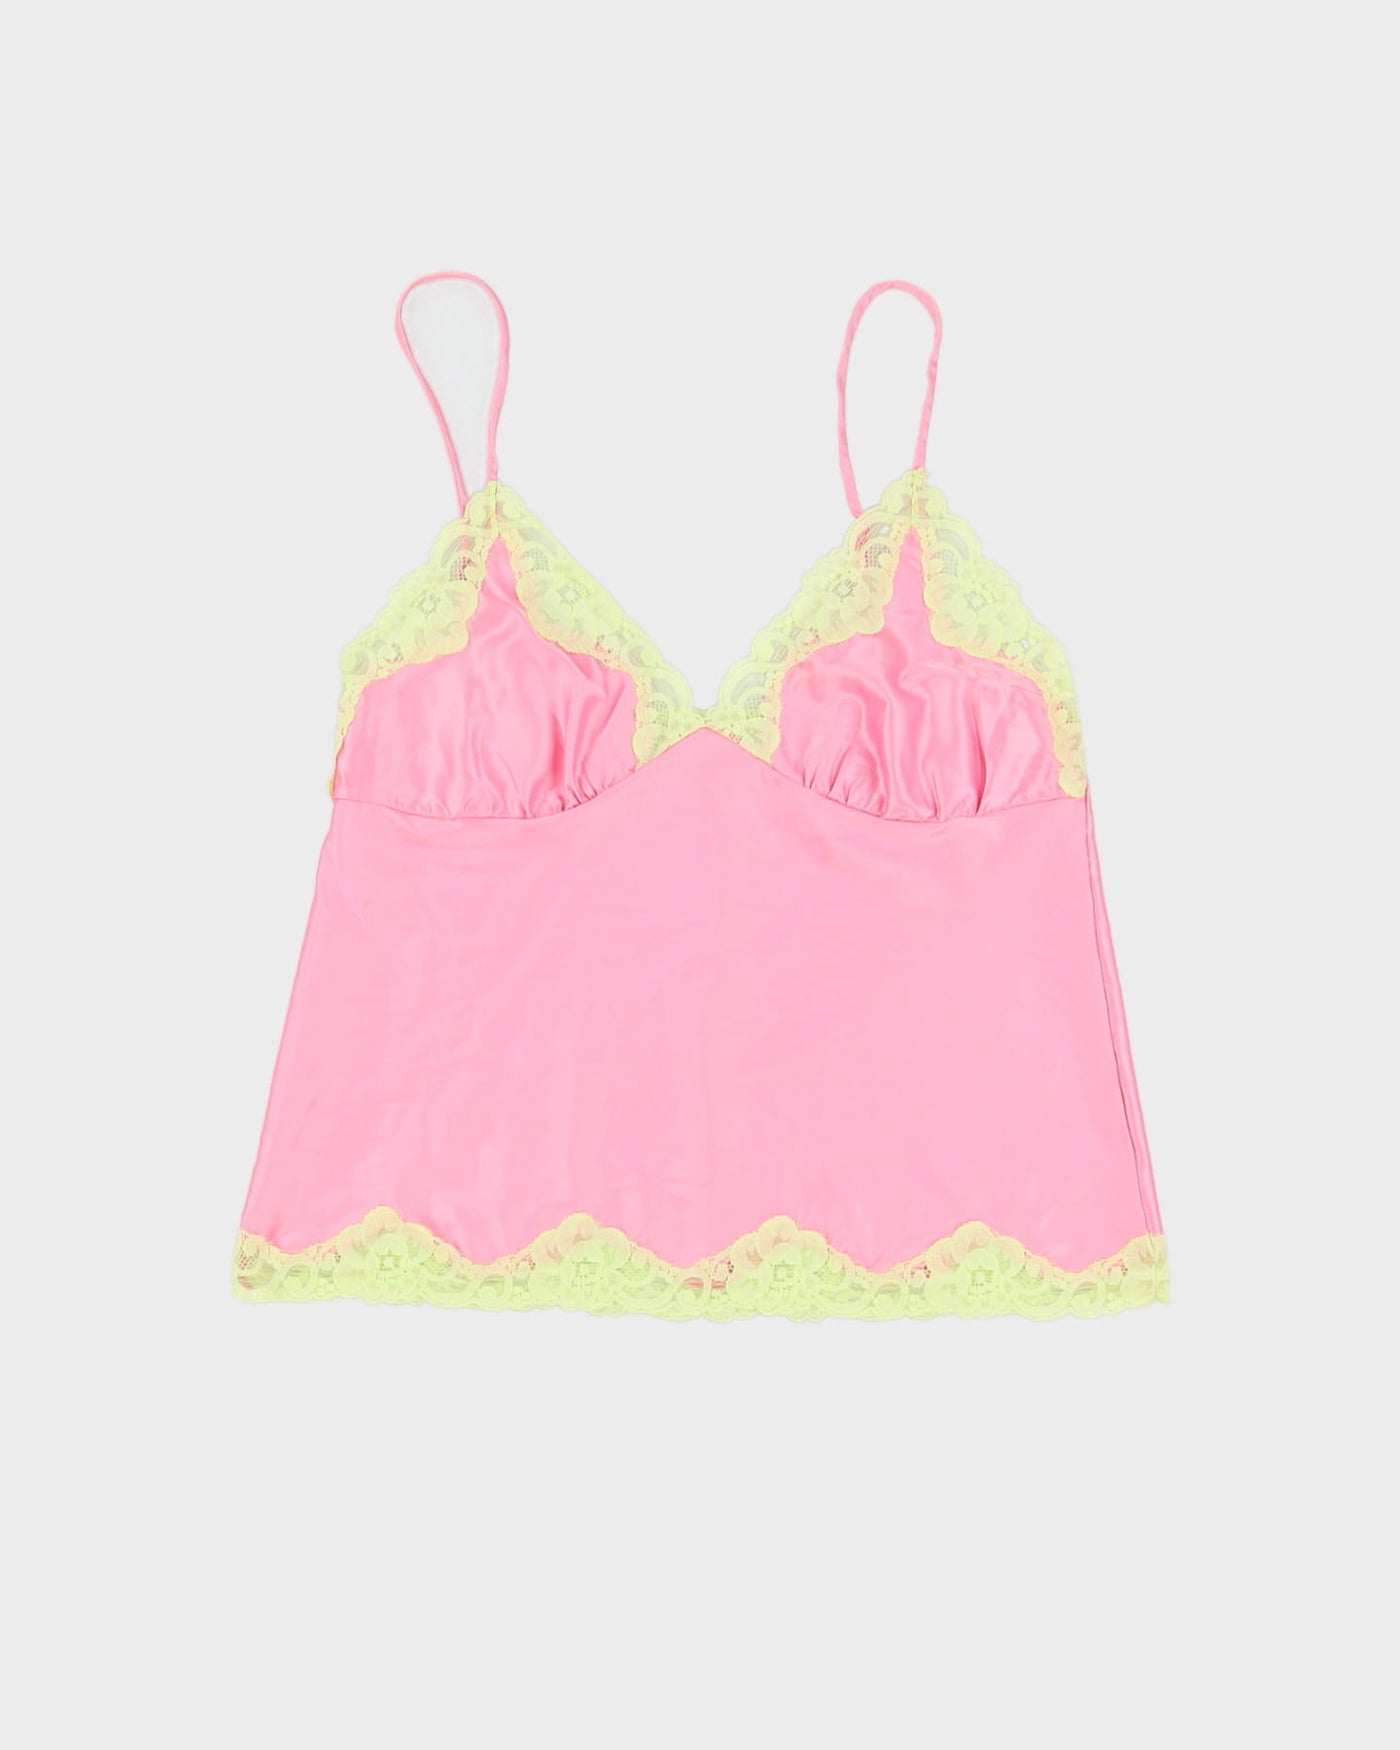 Y2K Pink With Yellow Lace Cami Top - S